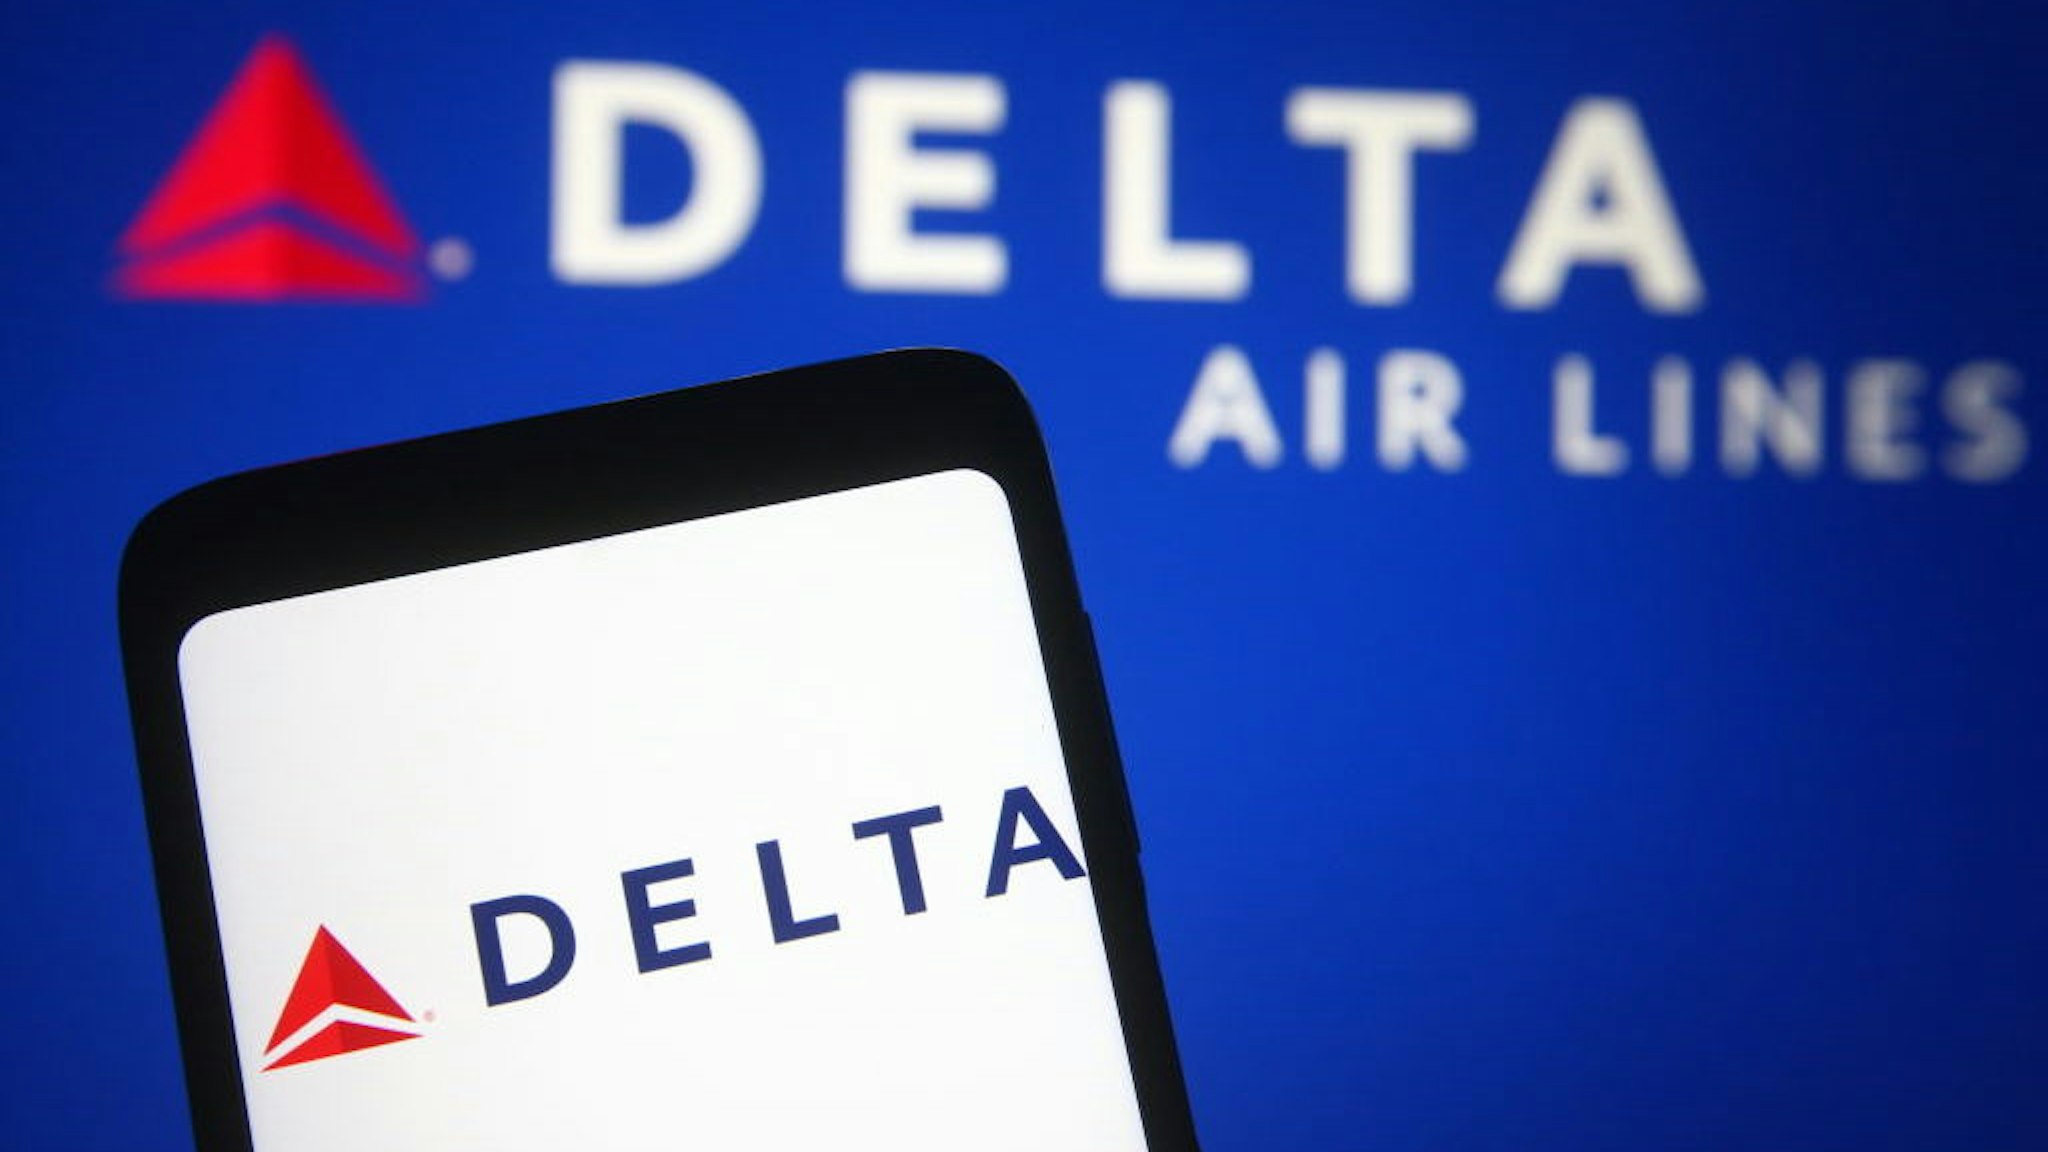 UKRAINE - 2021/03/21: In this photo illustration a Delta Air Lines logo is seen on a smartphone and a pc screen. (Photo Illustration by Pavlo Gonchar/SOPA Images/LightRocket via Getty Images)